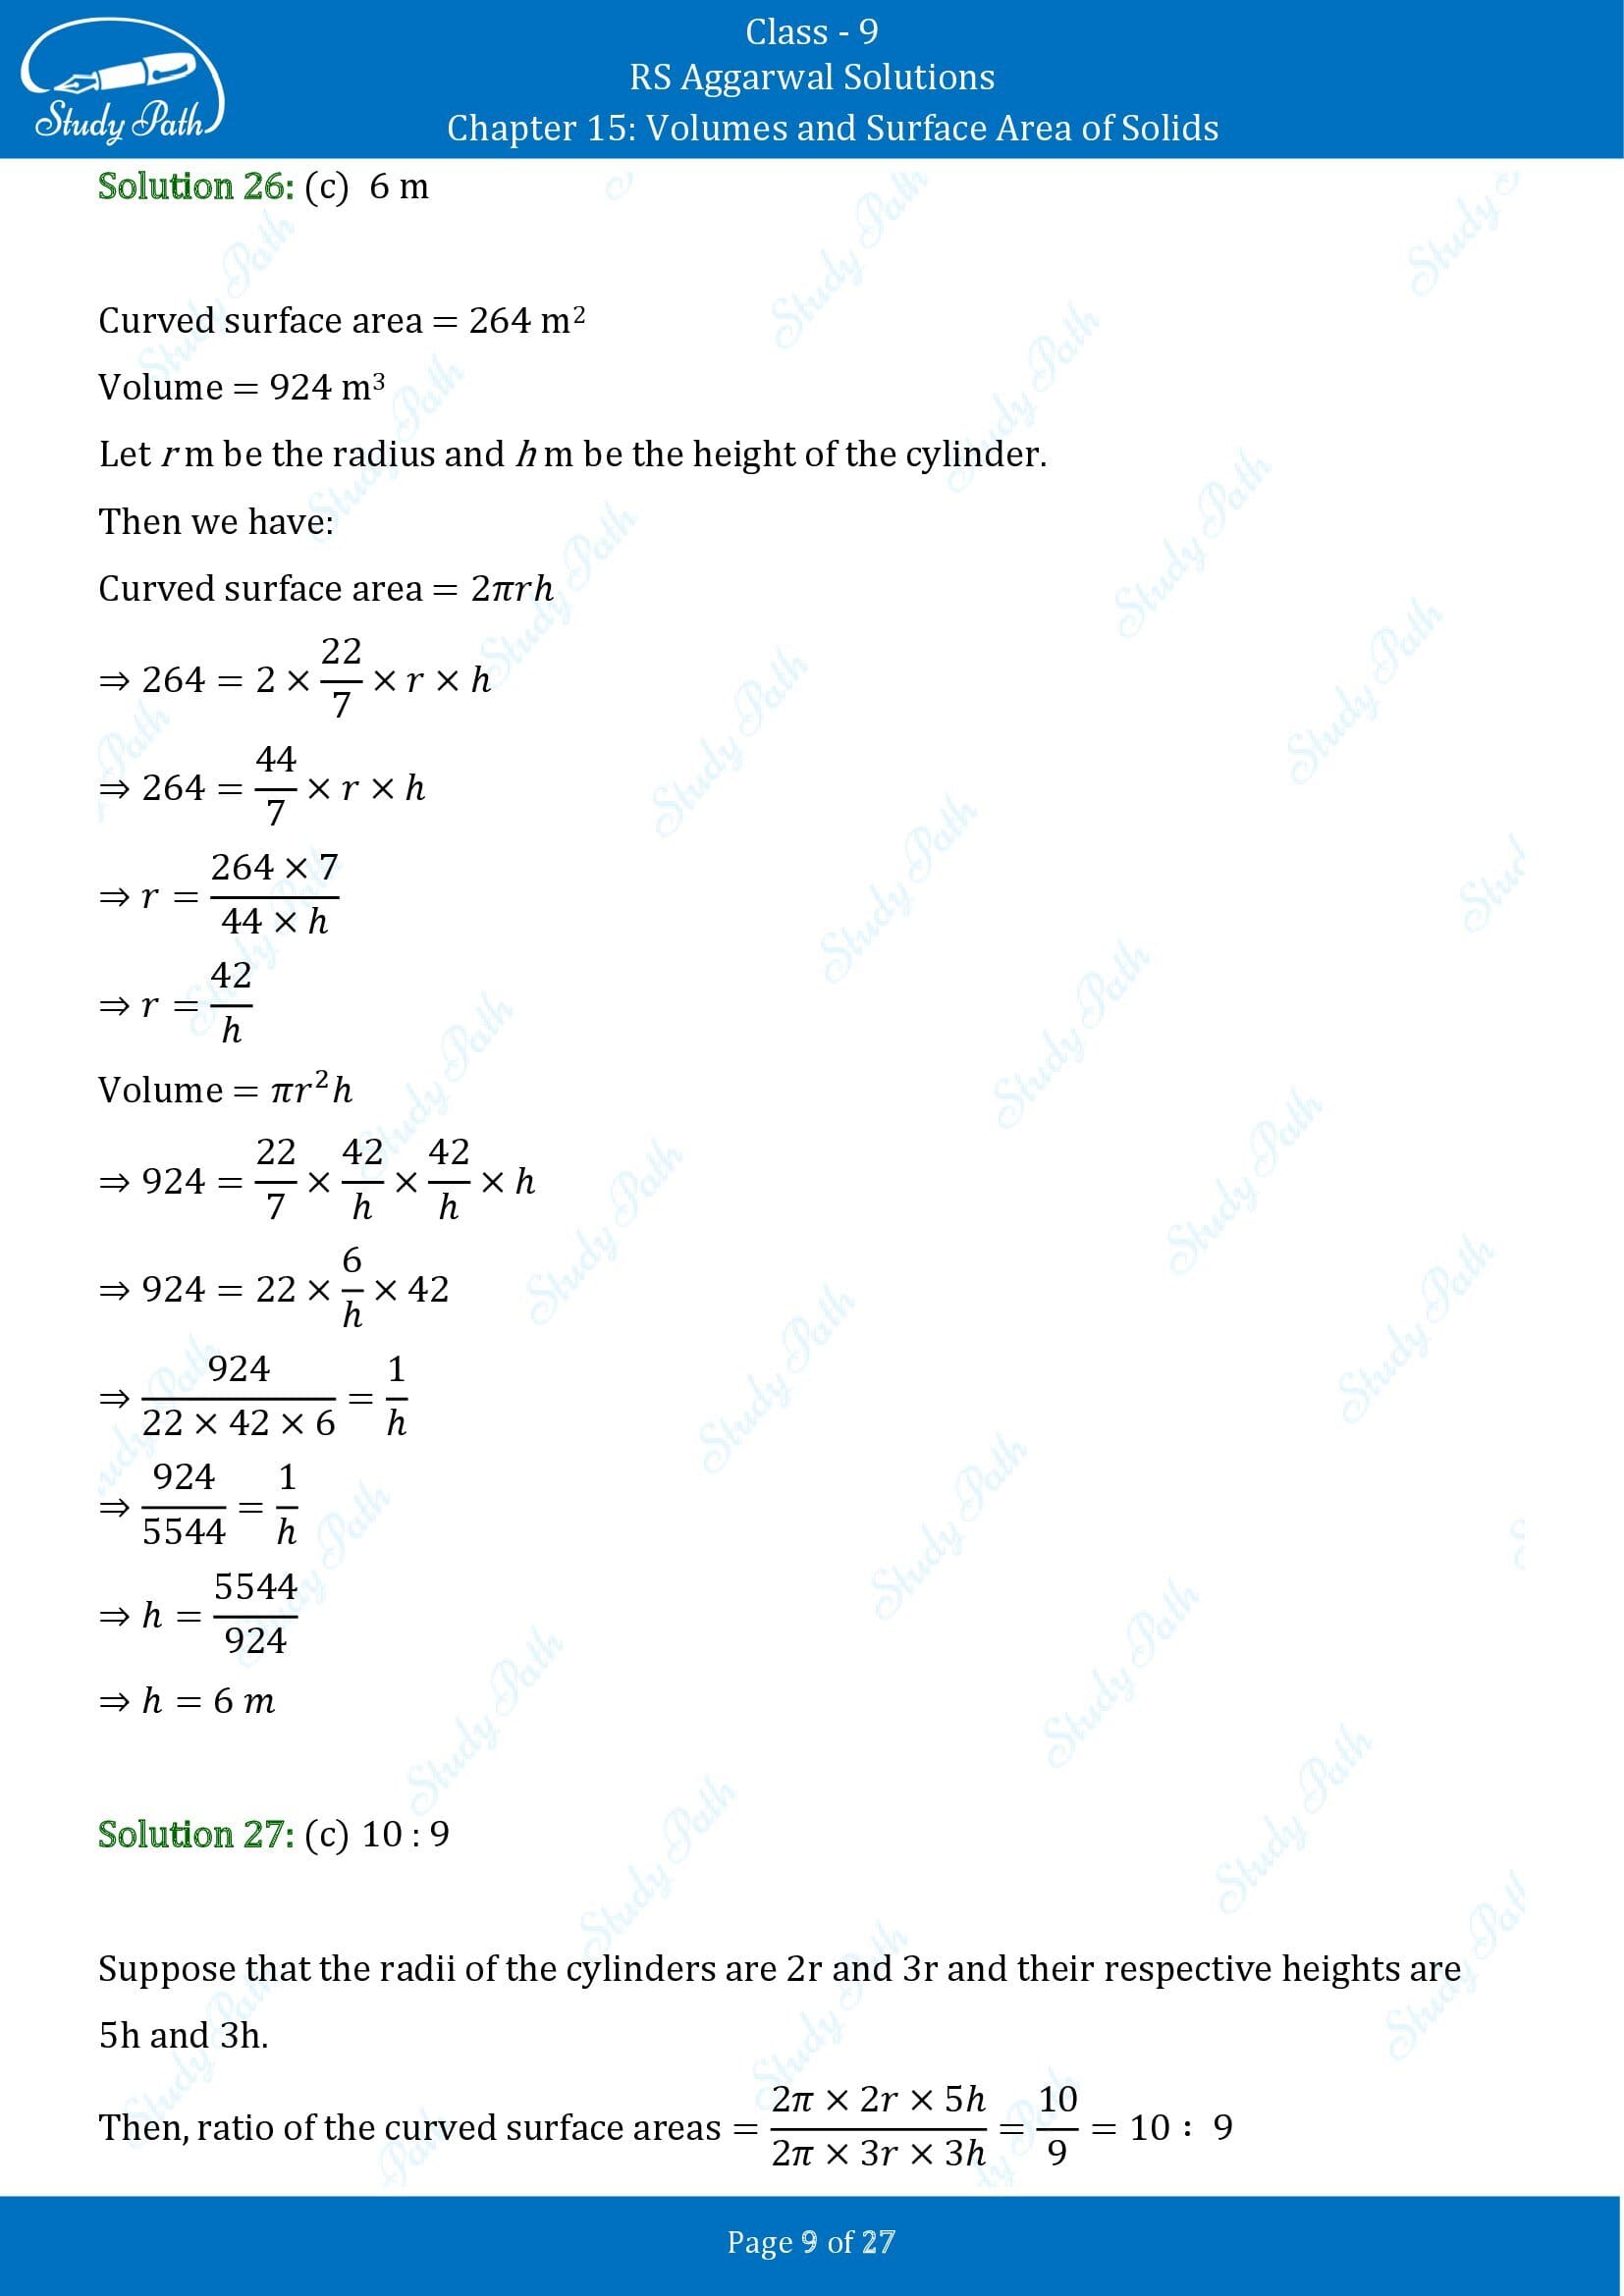 RS Aggarwal Solutions Class 9 Chapter 15 Volumes and Surface Area of Solids Multiple Choice Questions MCQs 00009